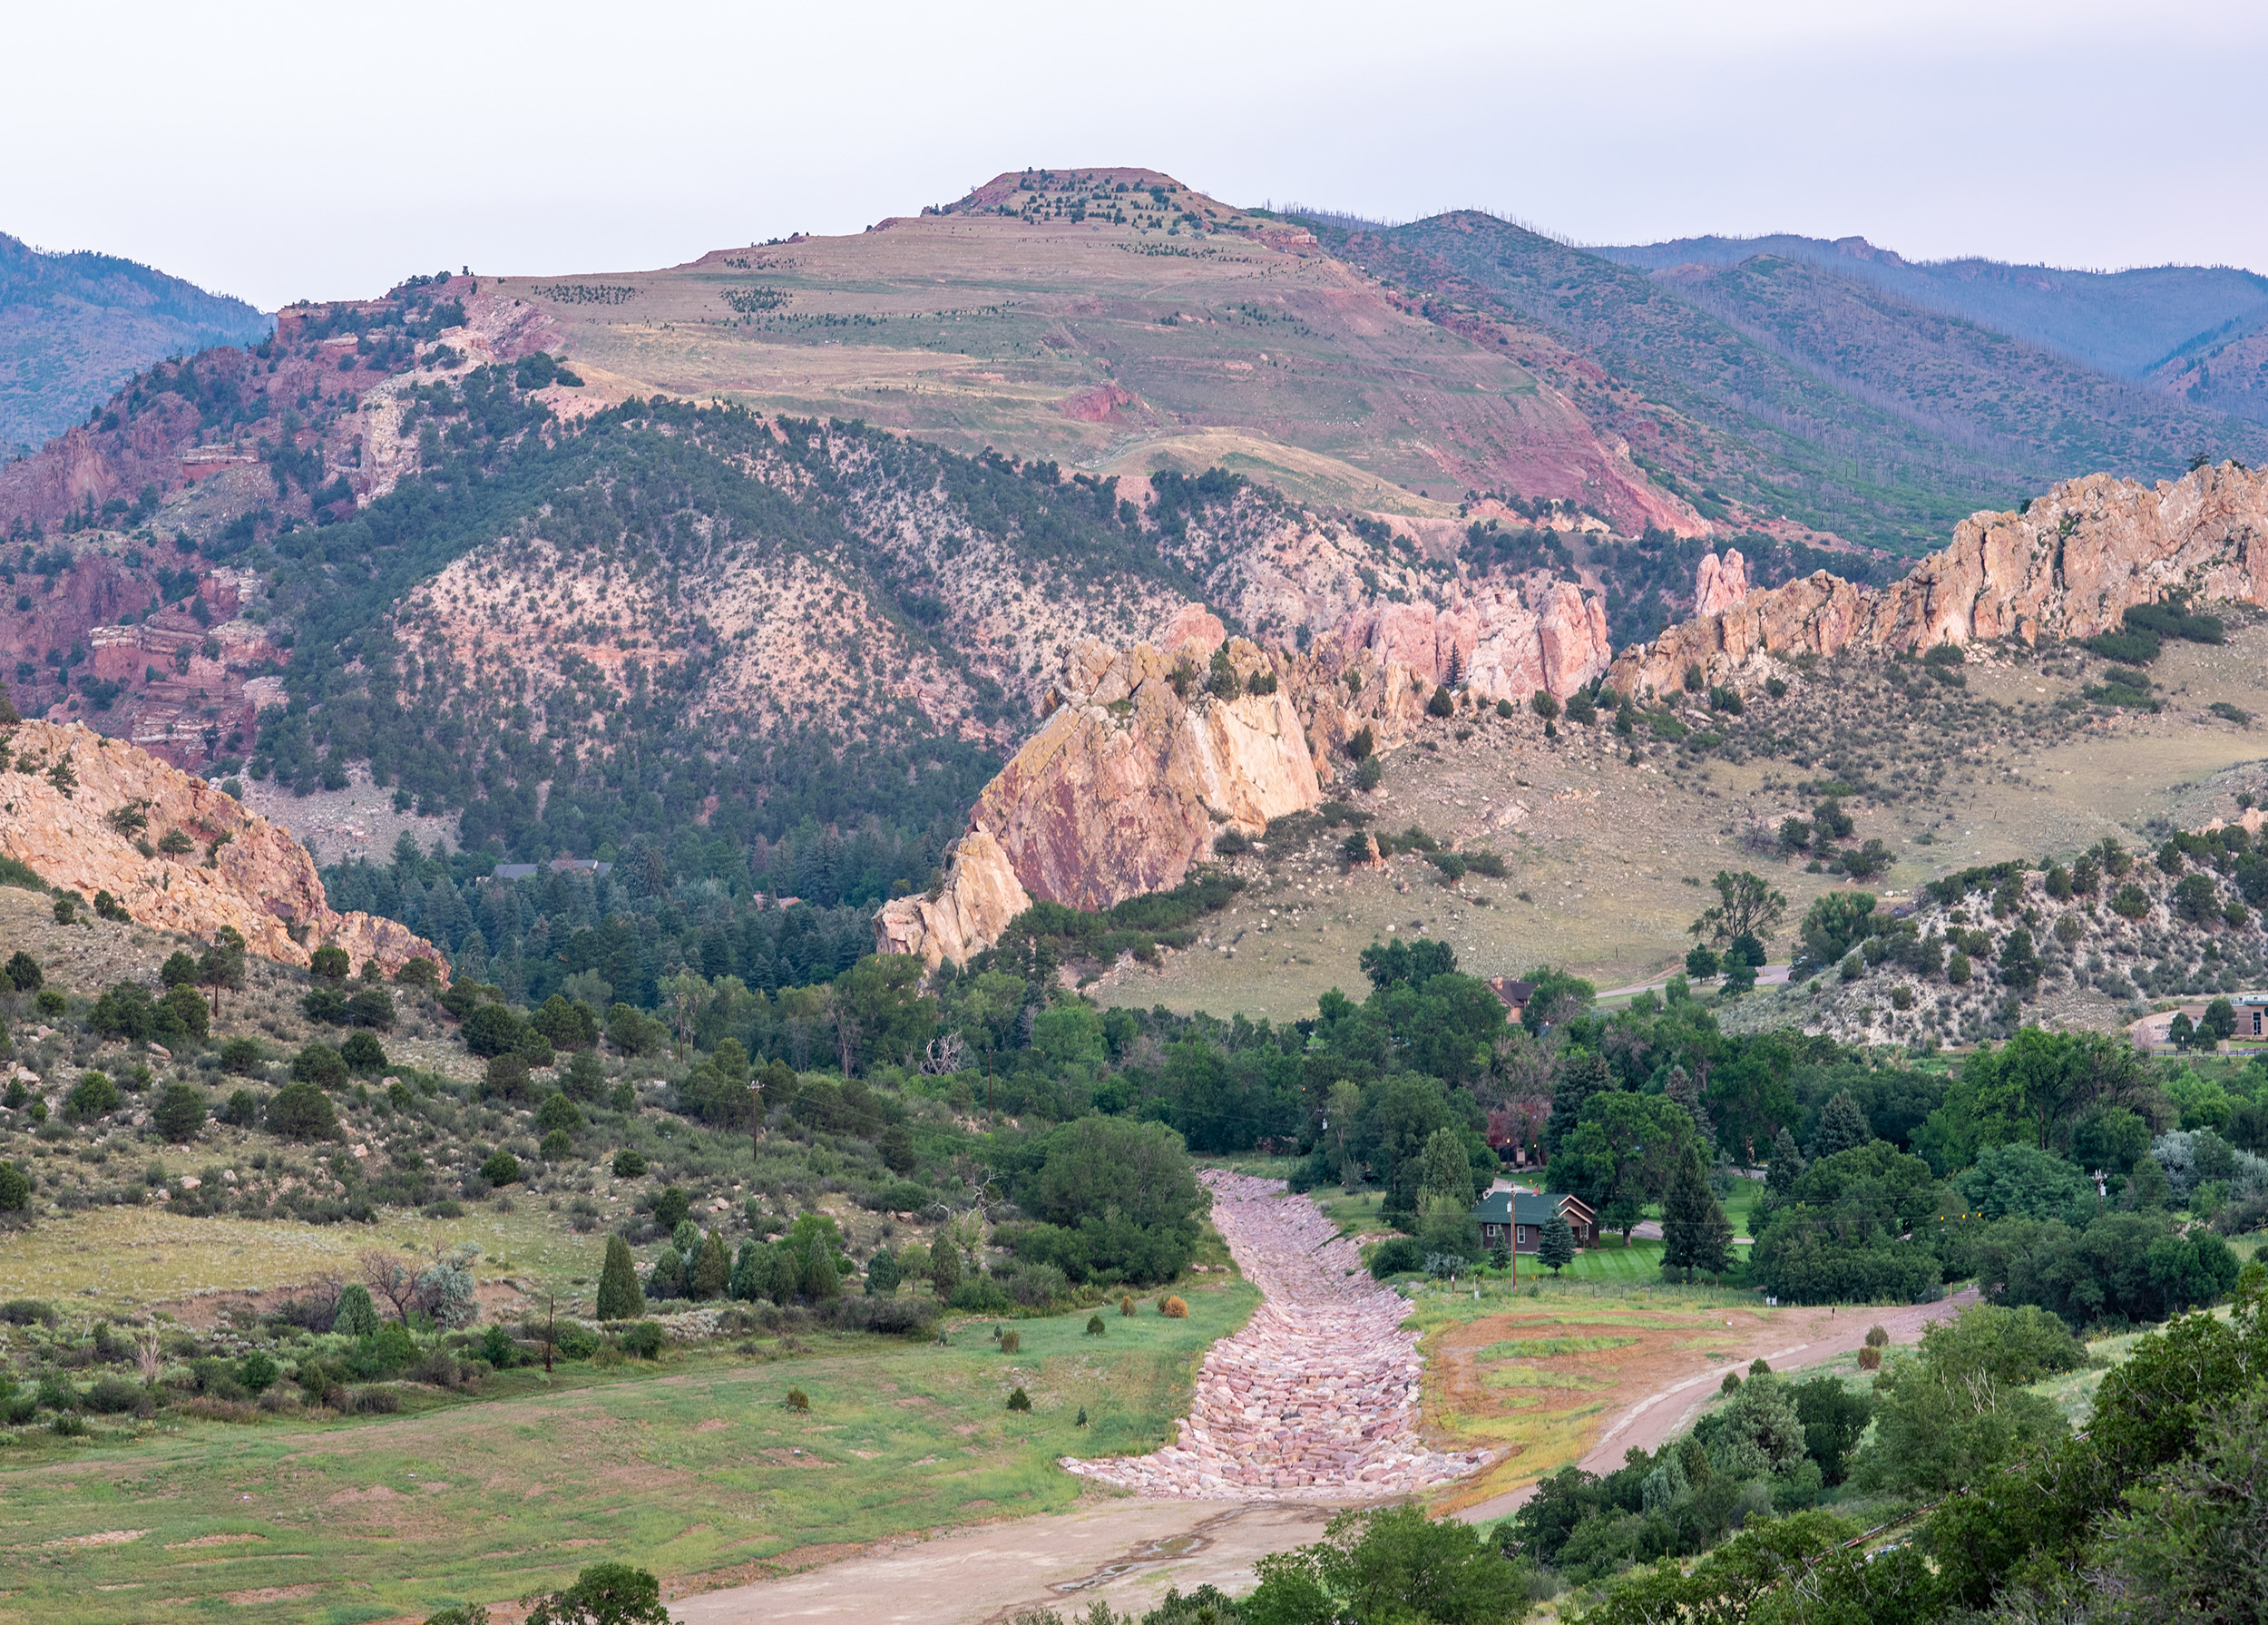 A new dam for stormwater detention and sediment collection in the far northeastern portion of Garden of the Gods will now store 169 acre-feet.